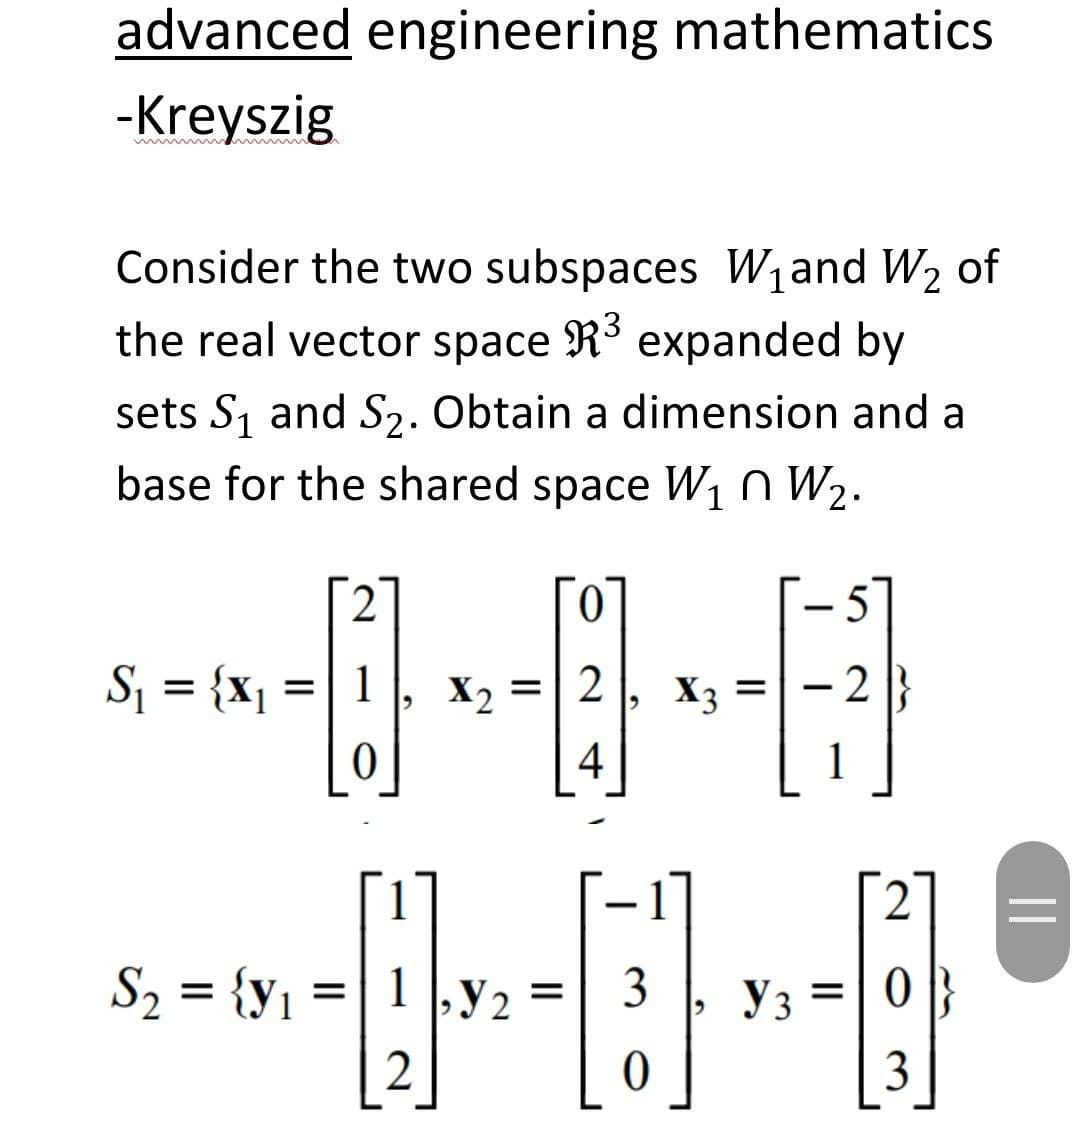 advanced engineering mathematics
-Kreyszig
Consider the two subspaces W1and W2 of
the real vector space R³ expanded by
sets S1 and S2. Obtain a dimension and a
base for the shared space W1n W2.
5]
-
Sj = {x1
1
X2
2
X3
- 2
%3D
%D
4
1
2
S2 = {y1 =
1 ,y 2
3
Уз
2
3
||
